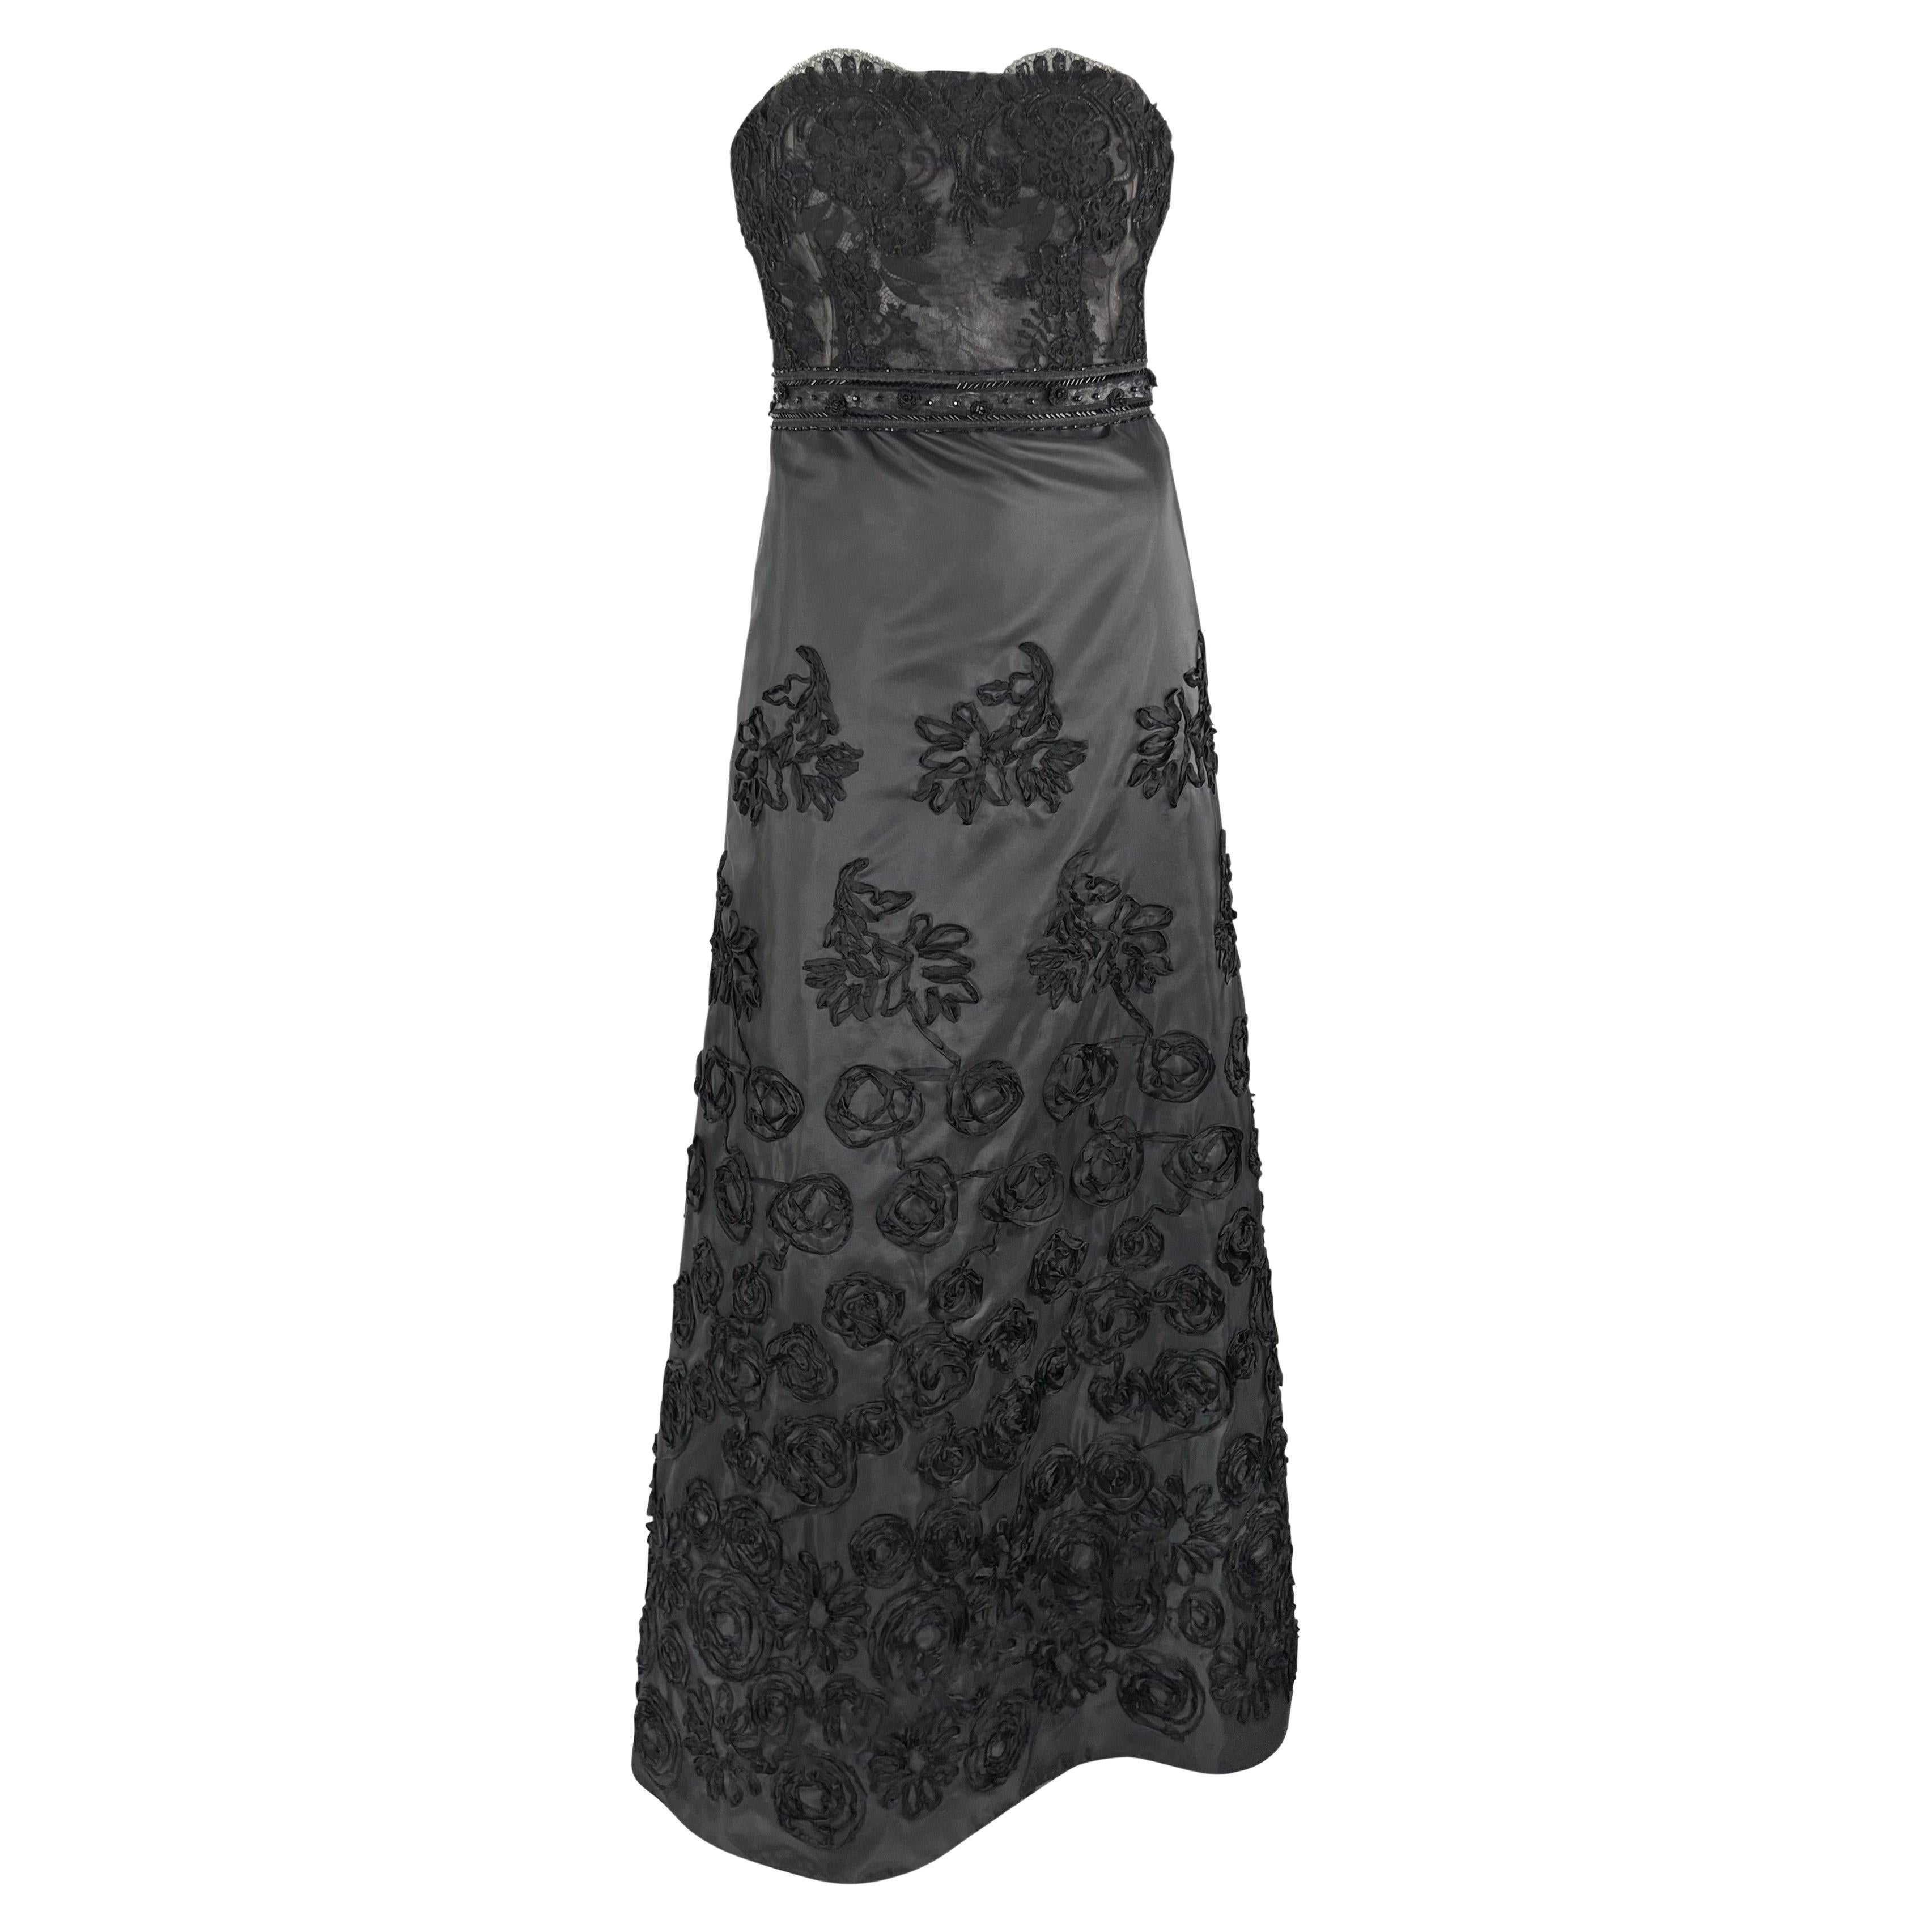 S/S 1999 Christian Lacroix Beaded Lace Overlay Strapless Taffeta Evening Gown For Sale